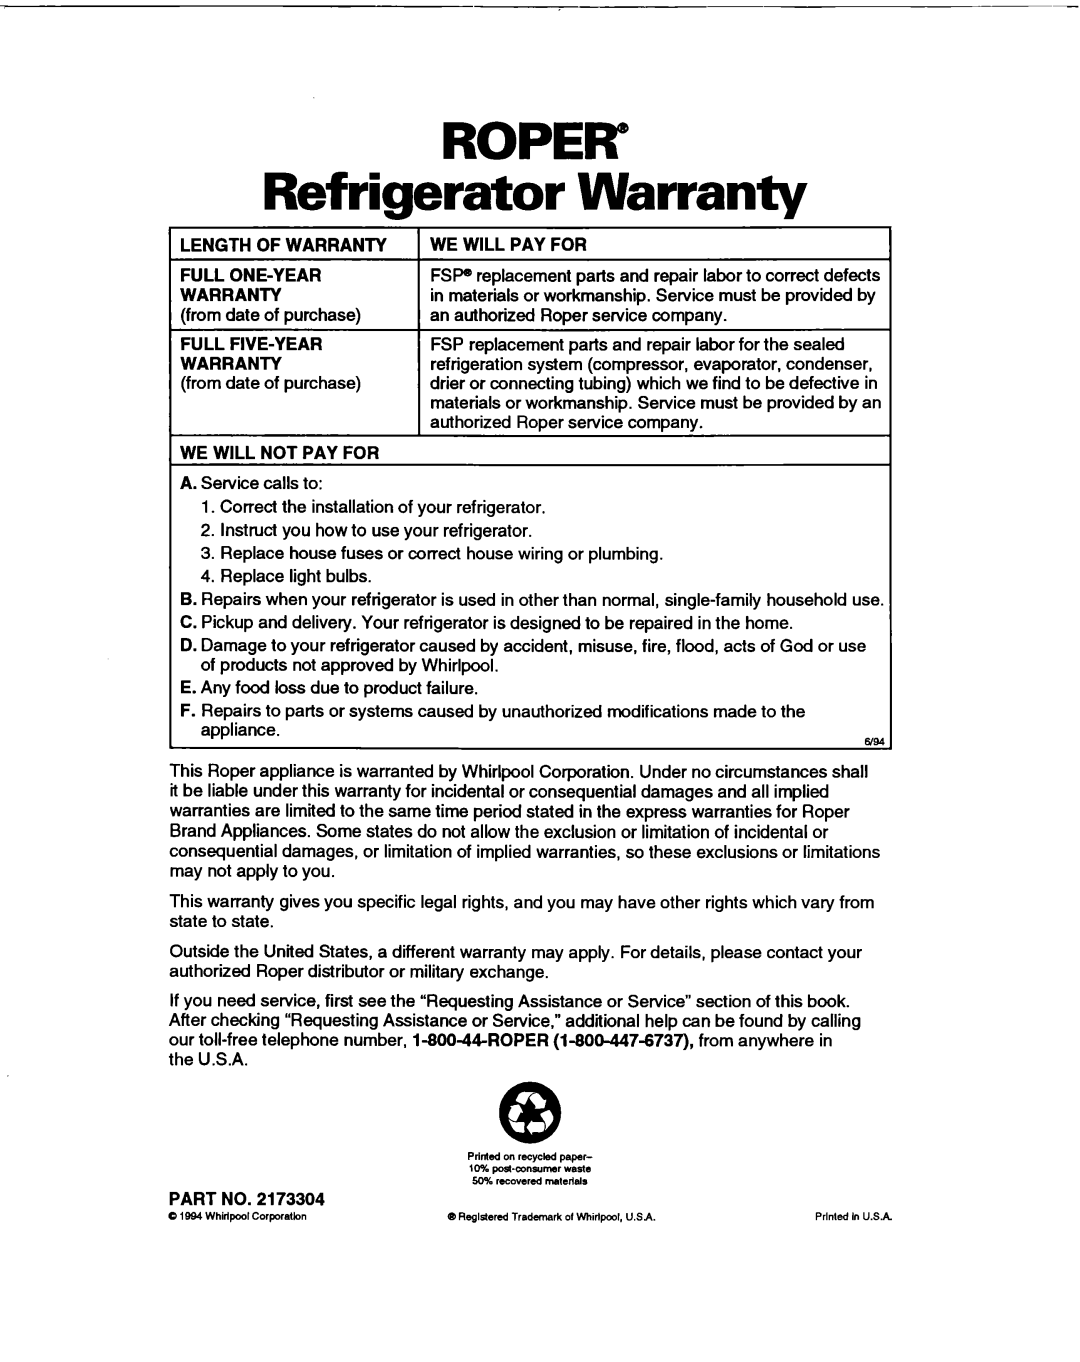 Whirlpool RT20DKXDN00 ROPER” Refrigerator Warranty, Length Of Warranty, We Will Pay For, Full One-Year, Full Five-Year 